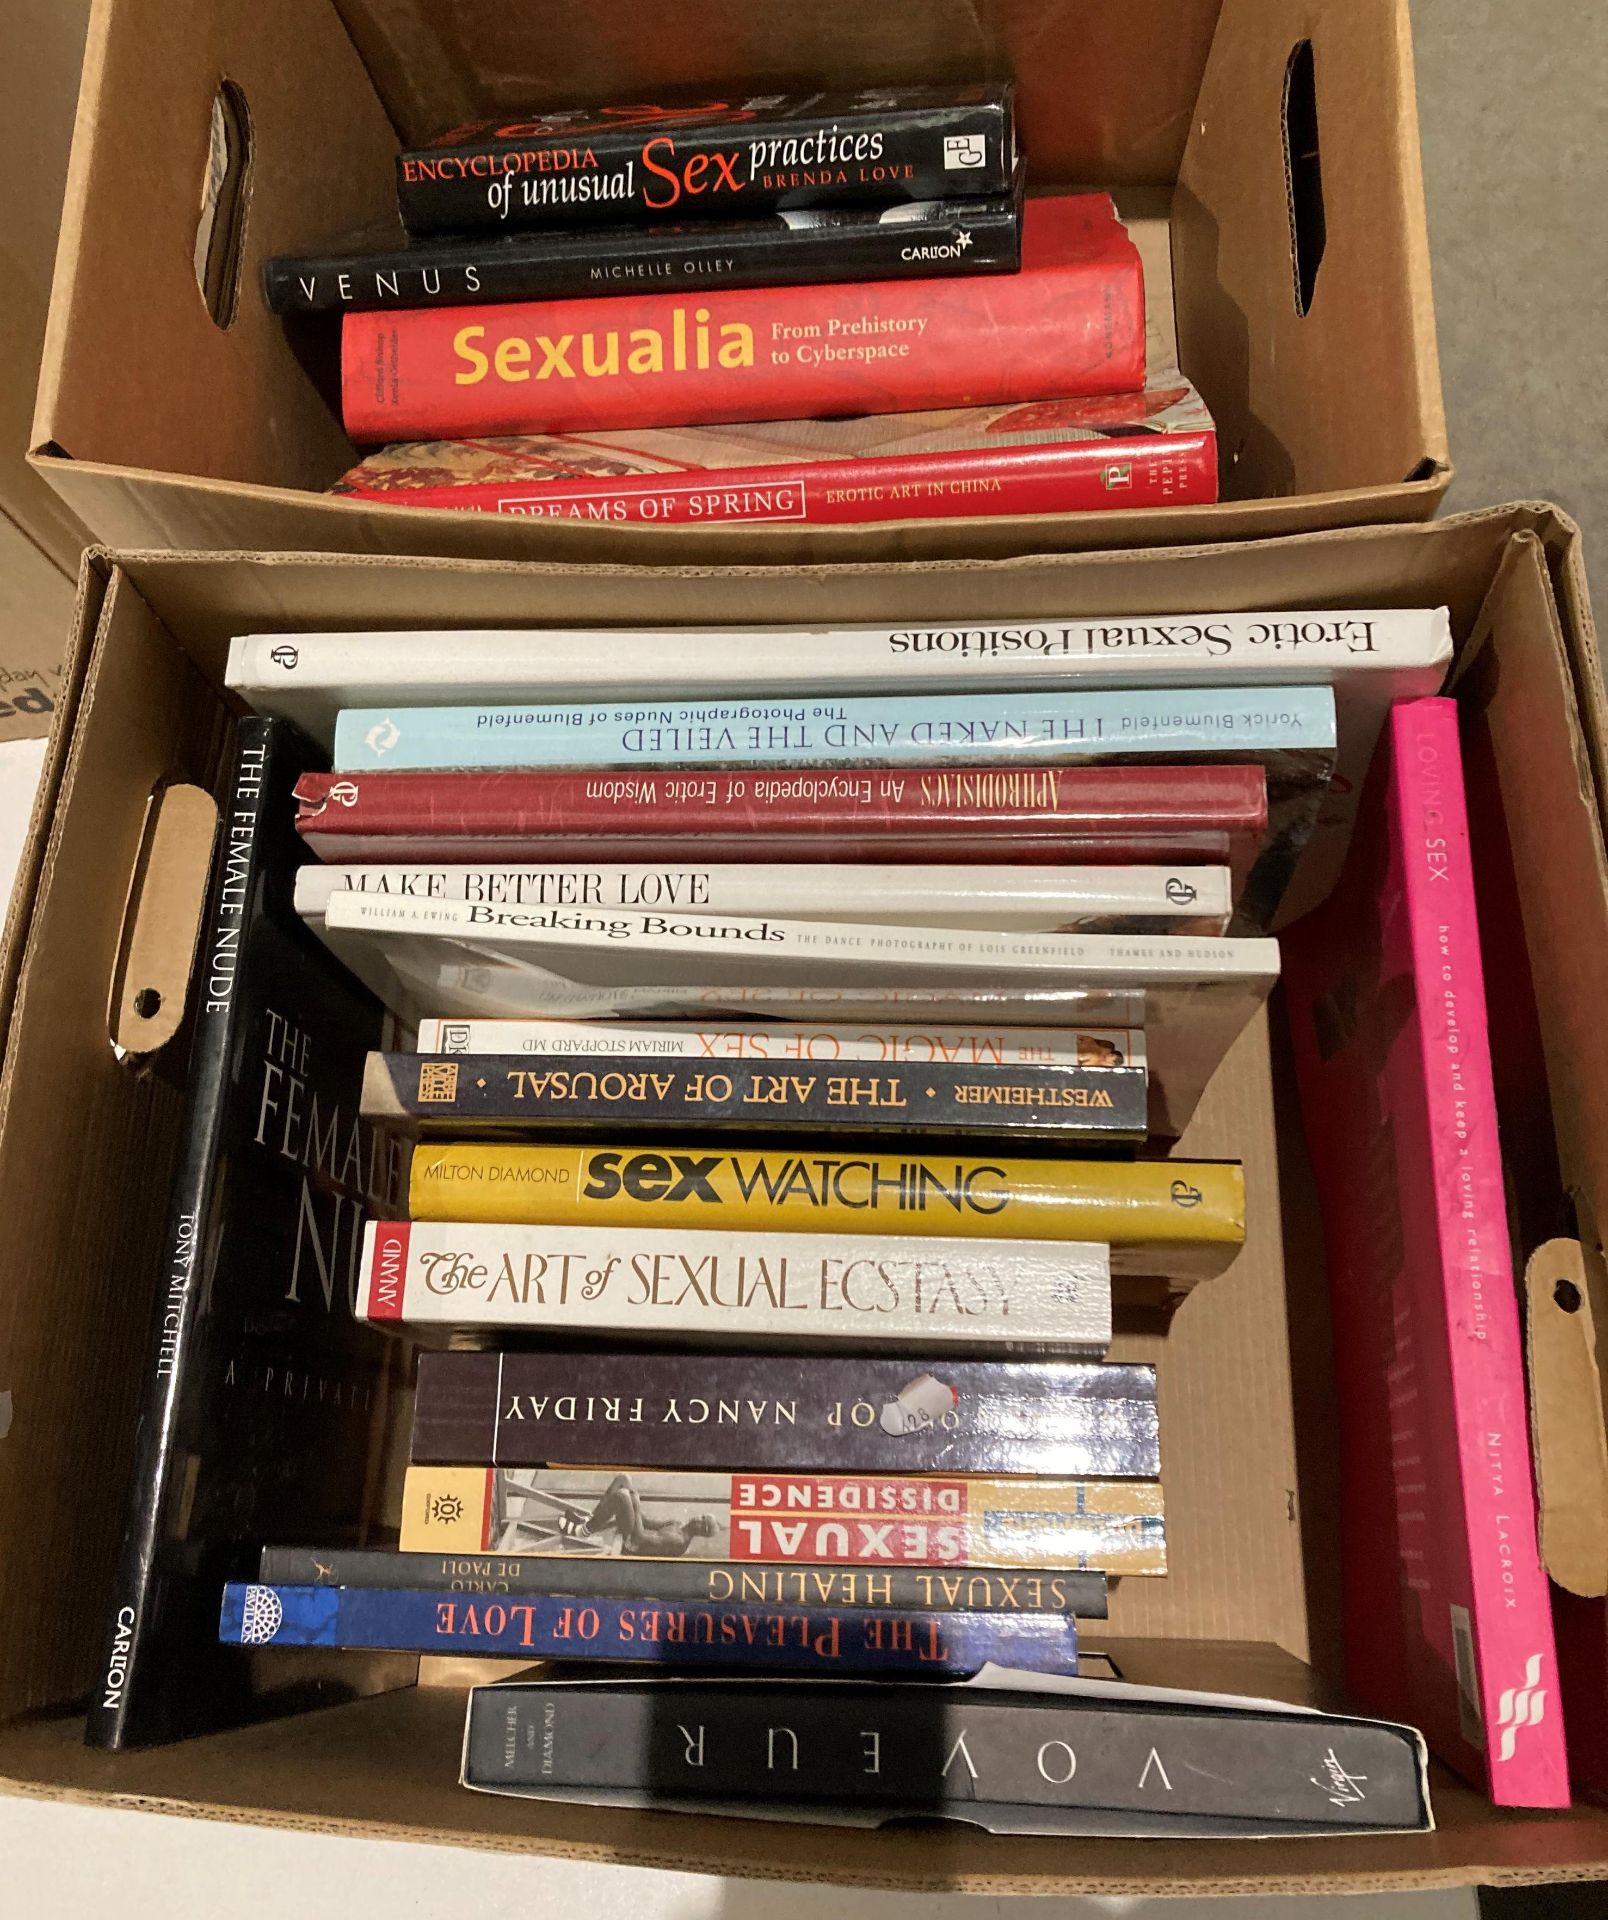 Contents to two boxes - approximately 23 assorted books on 'The Pleasure of love', 'Magic of Sex',